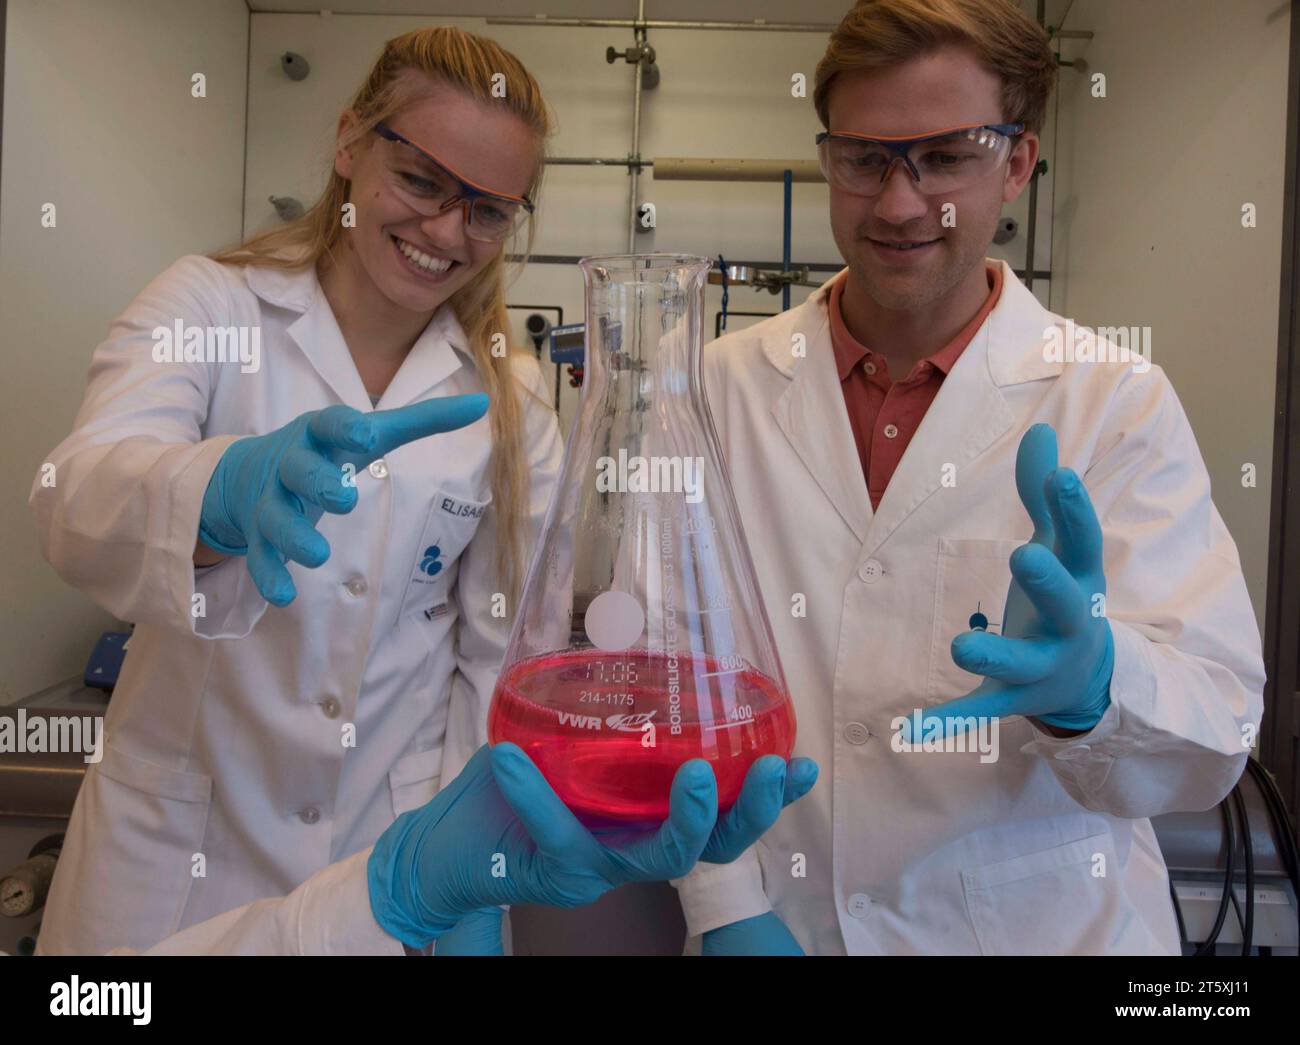 Scientific Investigation And Research Of Chemicals In A Chemical Laboratory Research Of Chemicals In A Chemical Laboratory Credit: Imago/Alamy Live News Stock Photo